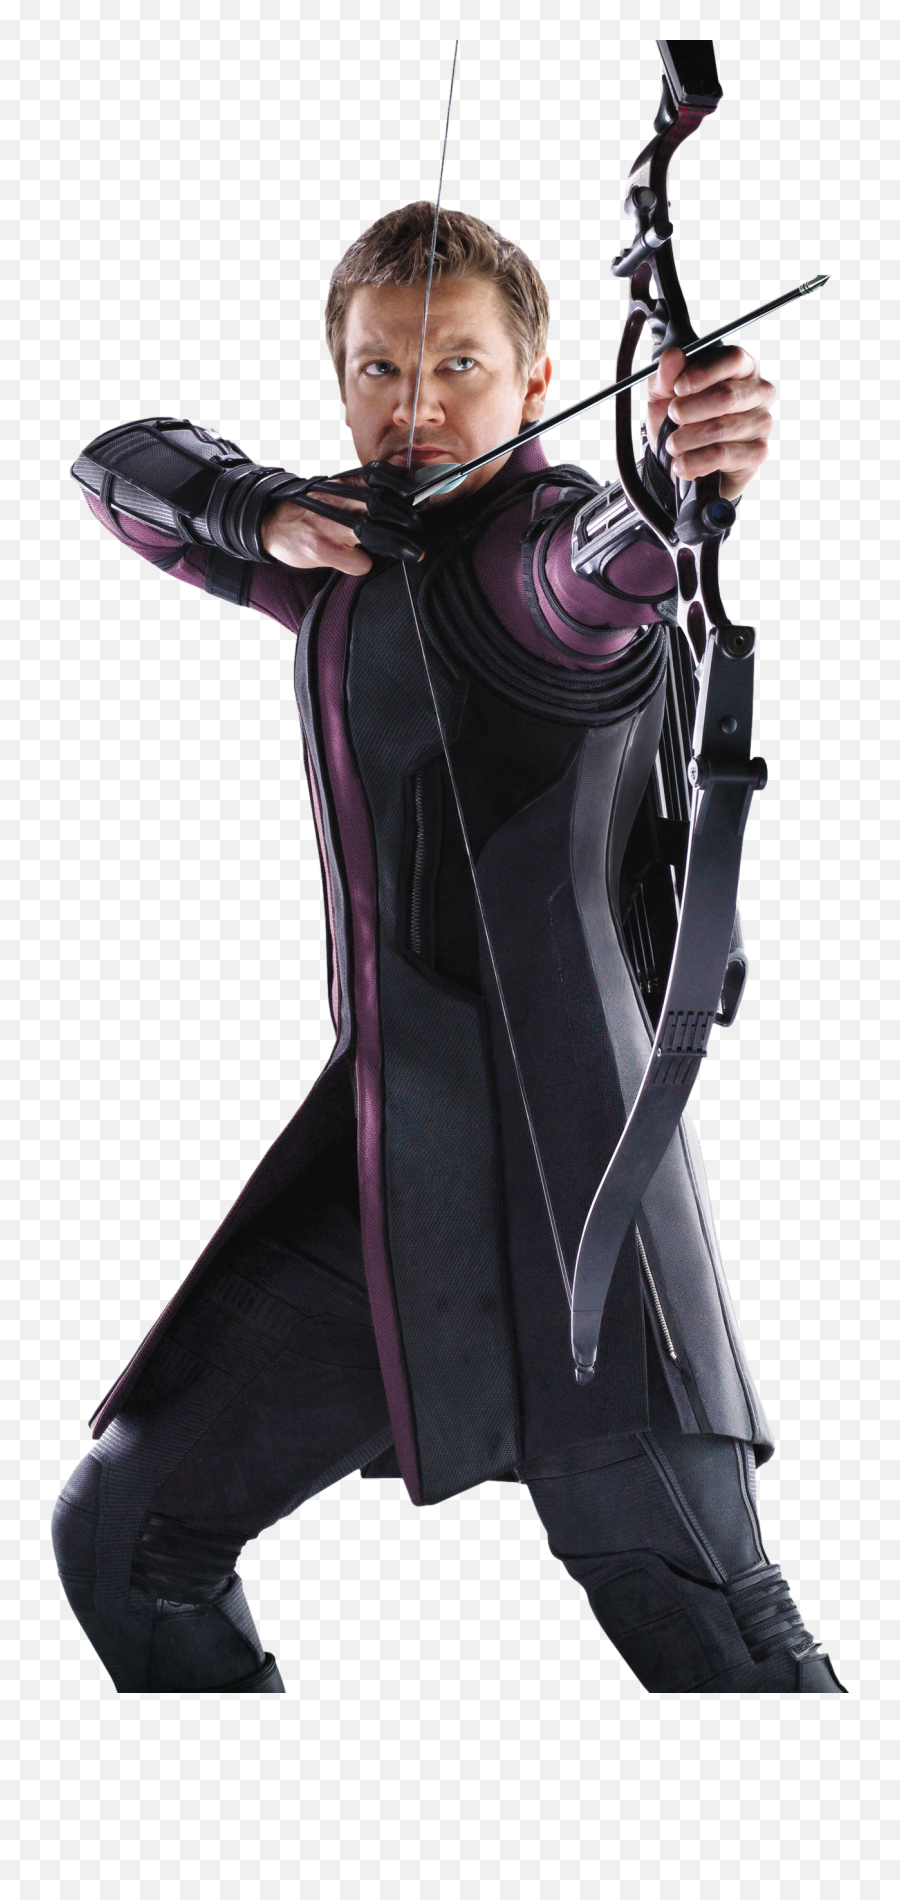 Hawkeye Cut Out - 21582 Transparentpng Avengers Age Of Ultron Hawkeye,Hawkeye Transparent